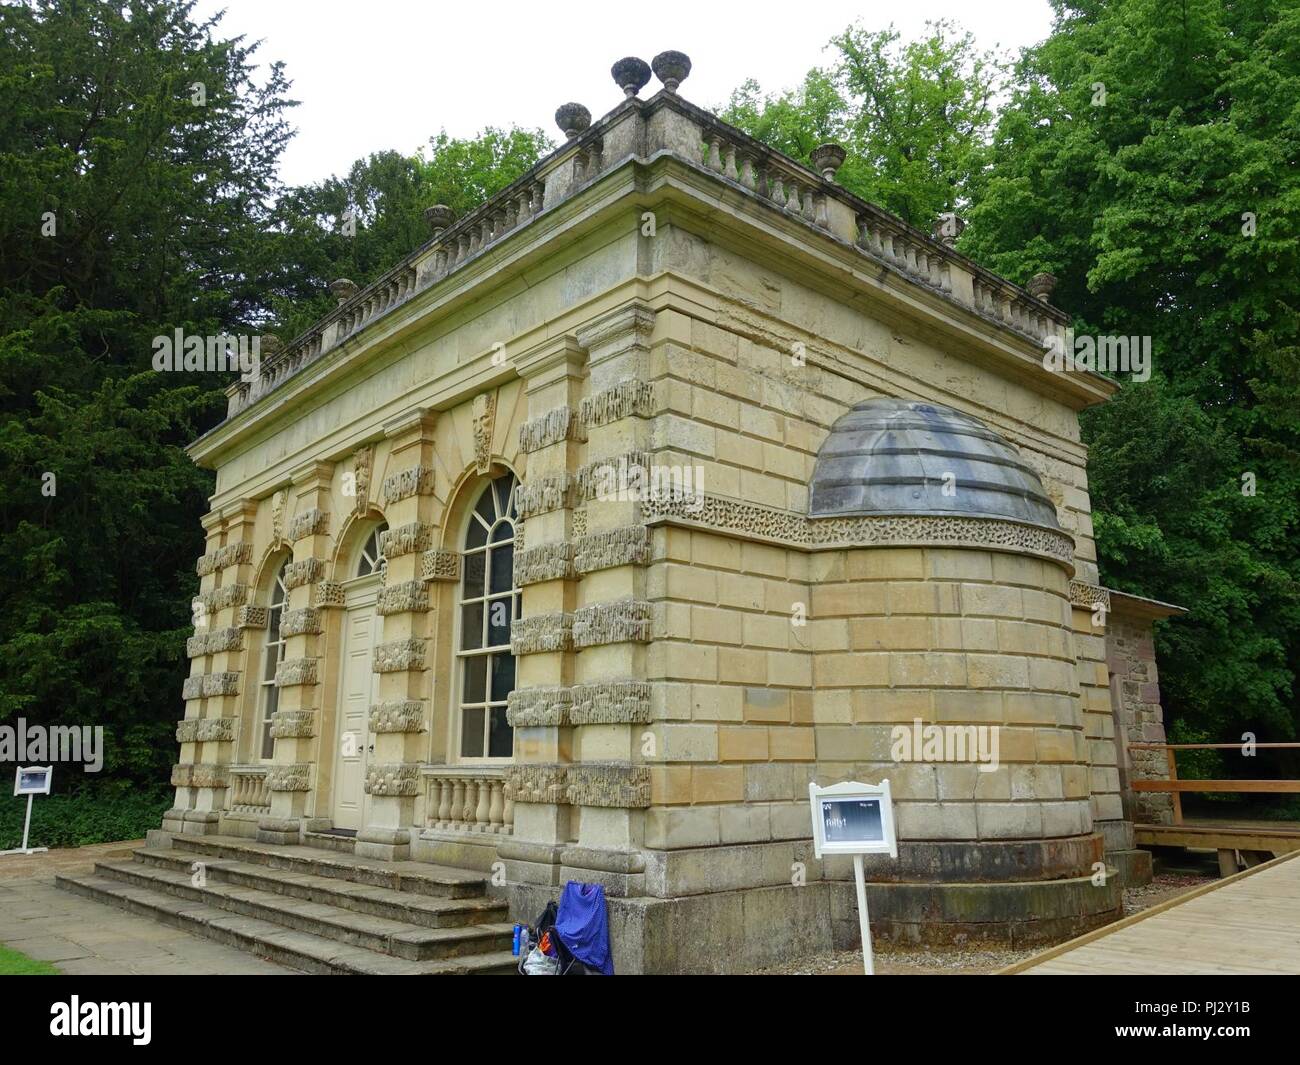 Banqueting House, Studley Royal Park - North Yorkshire, England - Stock Photo